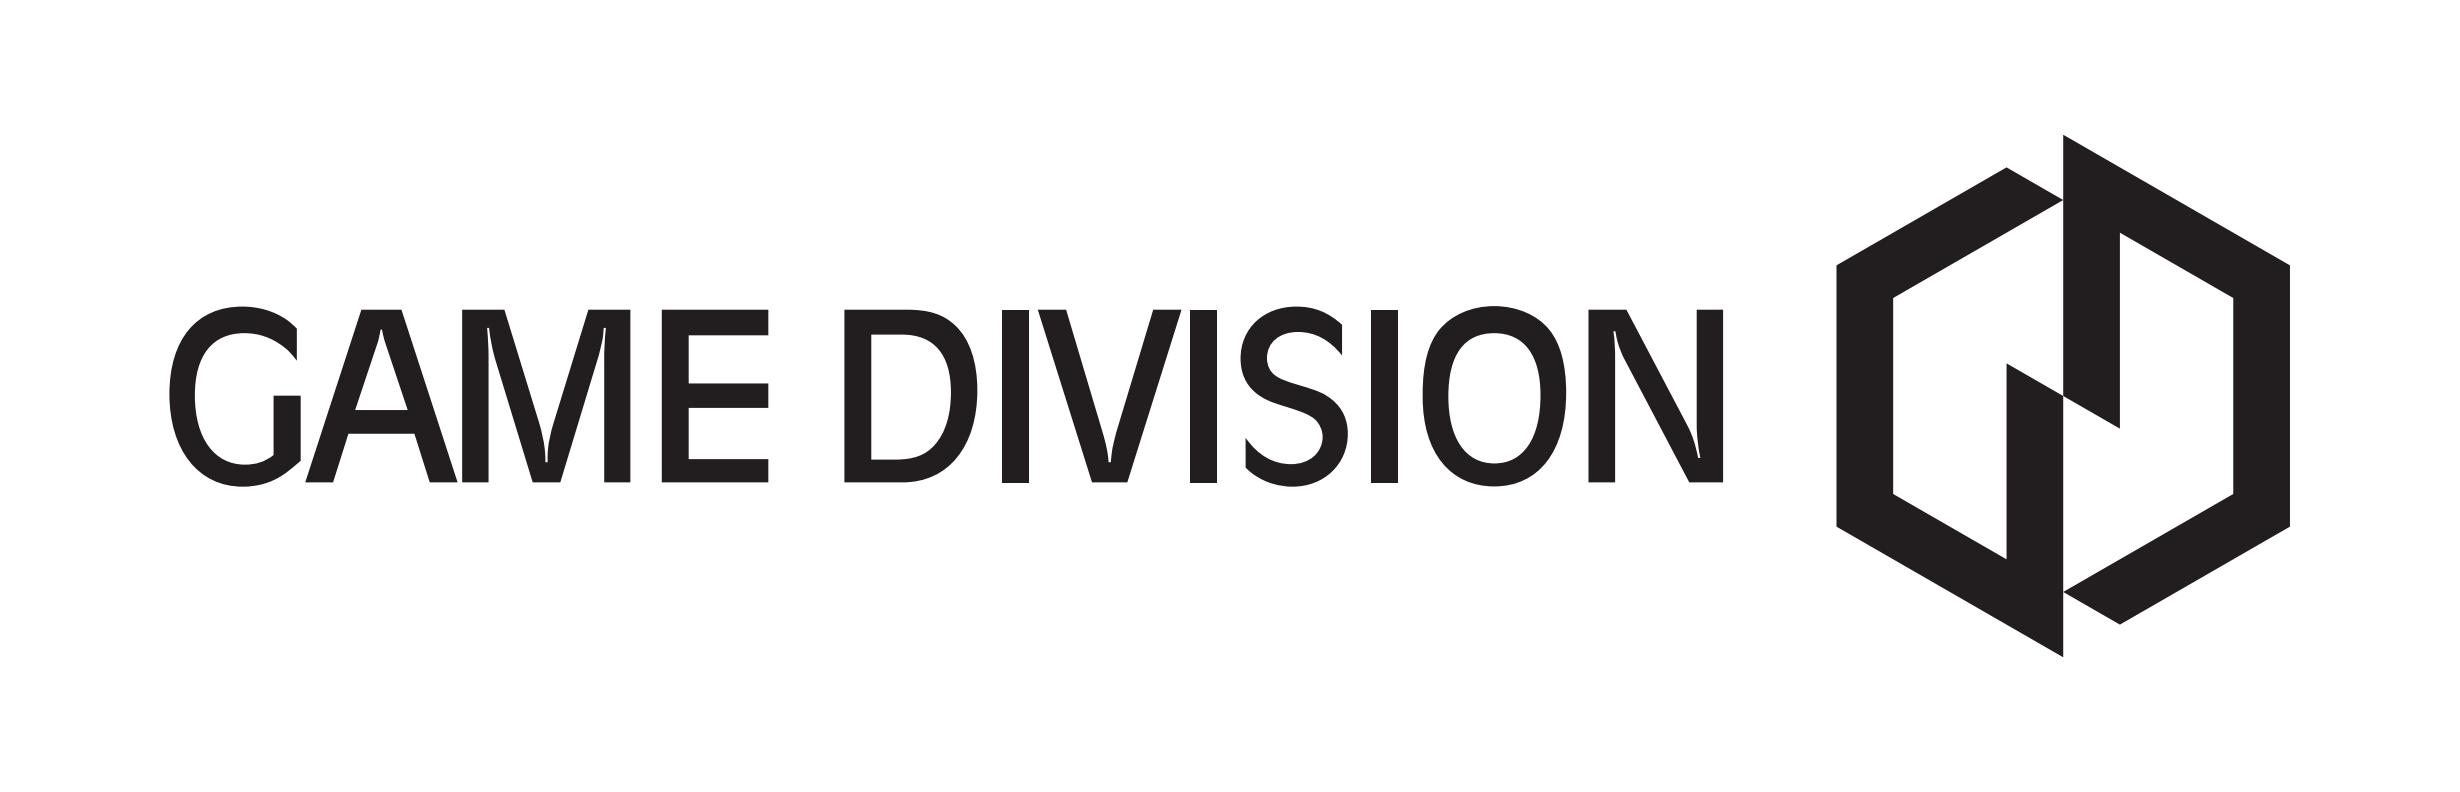 Game Division